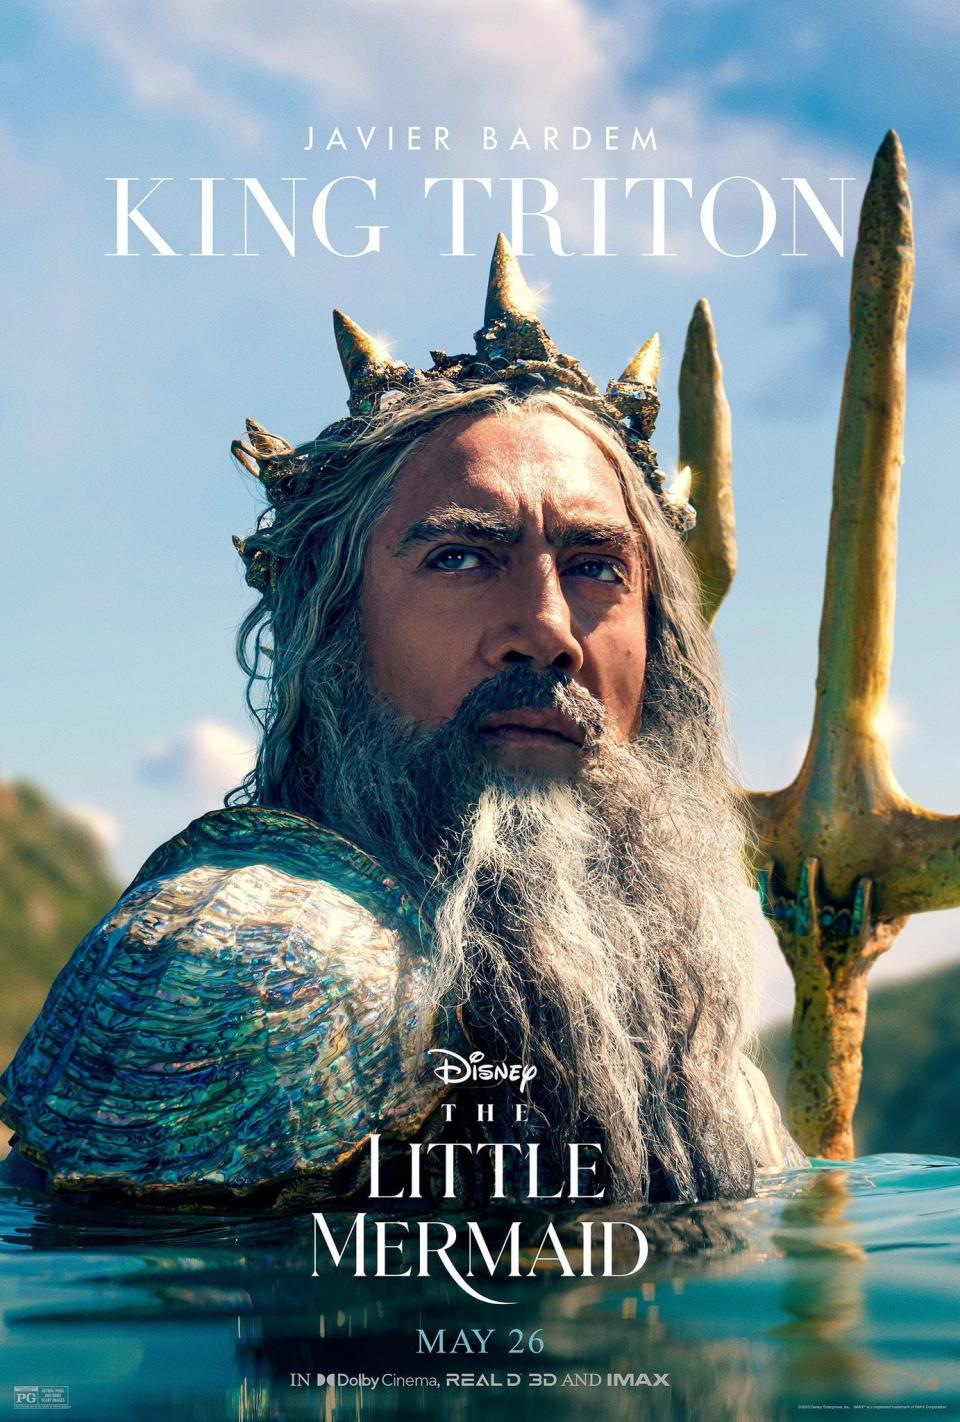 Javier Bardem as King Triton emerges from the sea